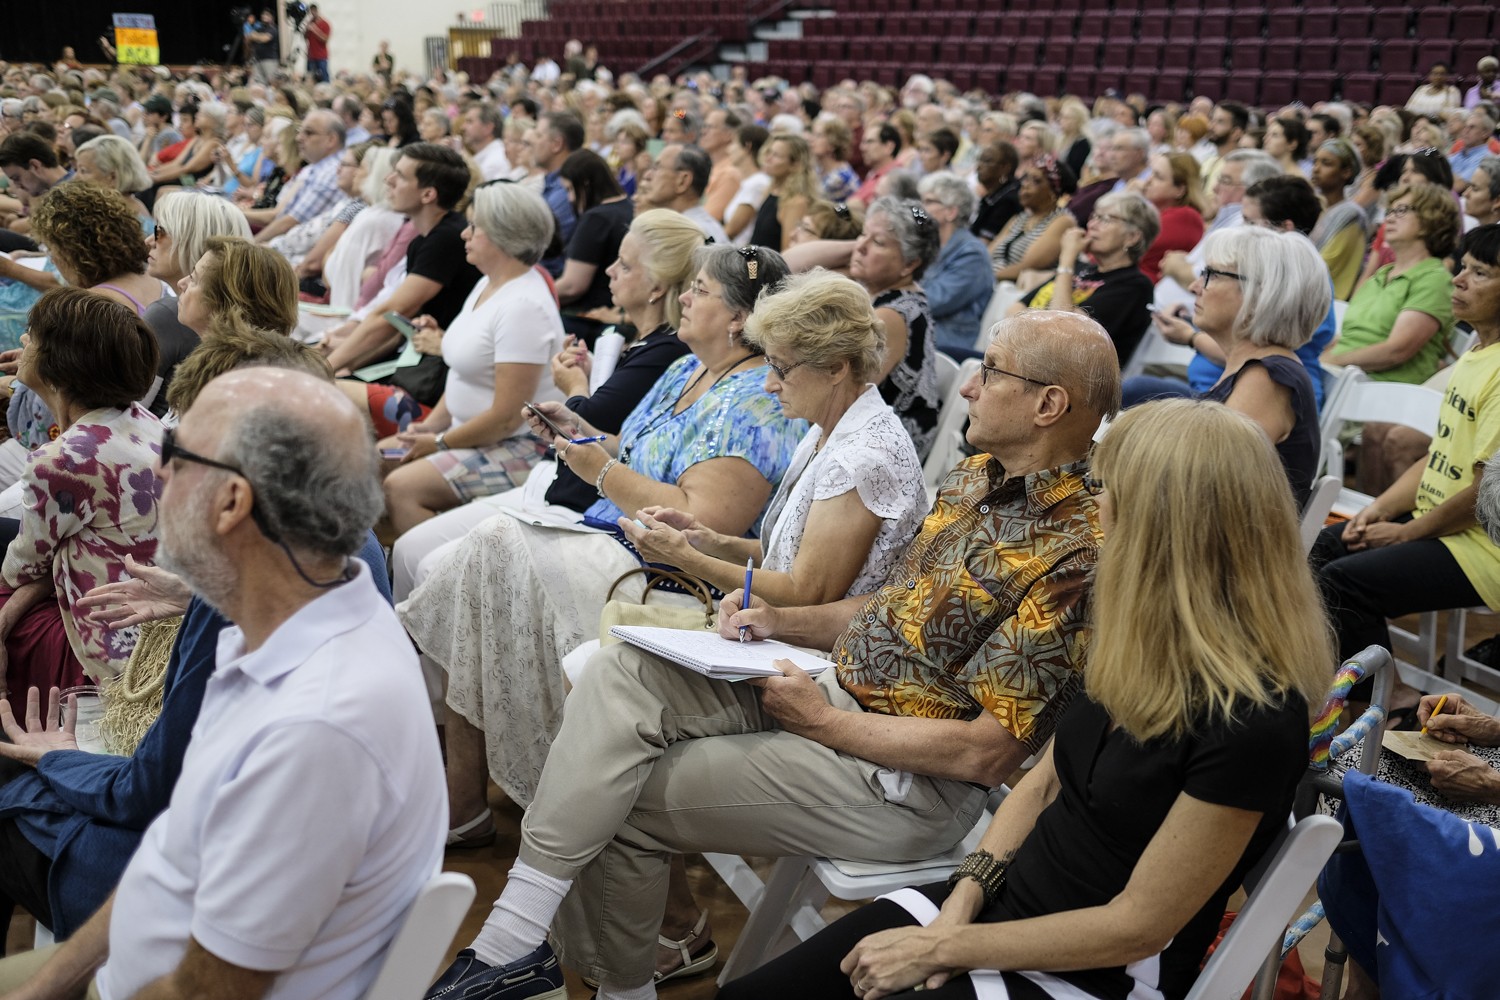 Many attendees of the Health Care Town Hall took careful notes while the Congressman spoke about the Affordable Care Act and the Senate's proposal bill. It is estimated that over 700 people were present for the event.